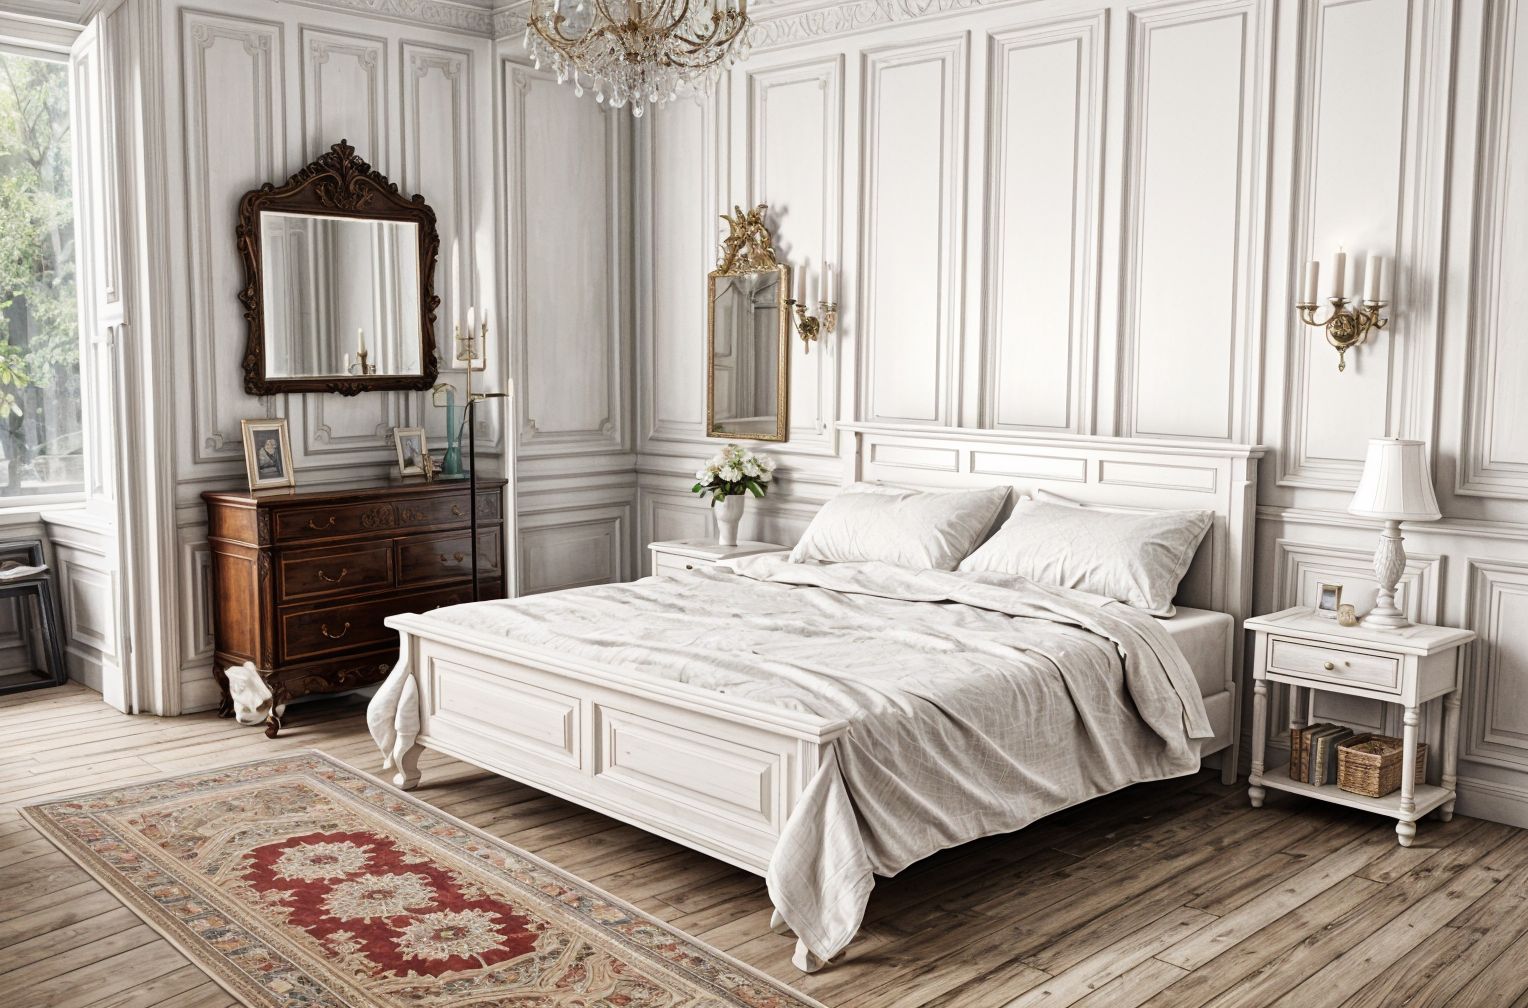 Colonial style Bedroom